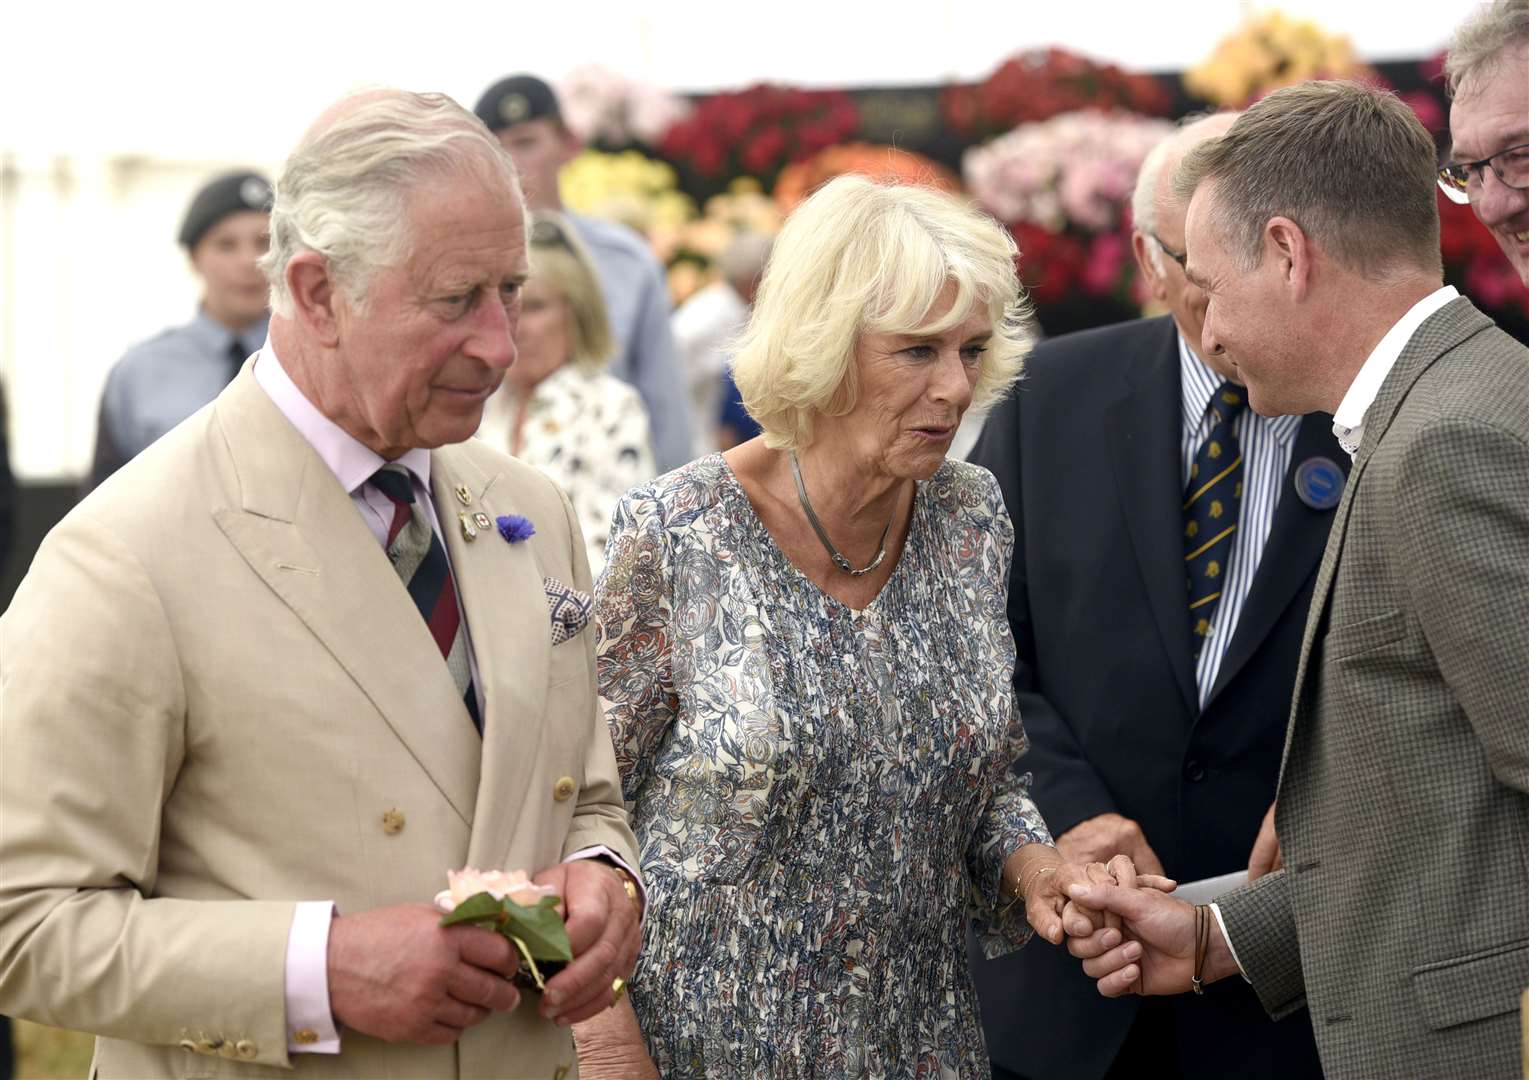 Prince Charles and Camilla will open this year's Games on behalf of The Queen